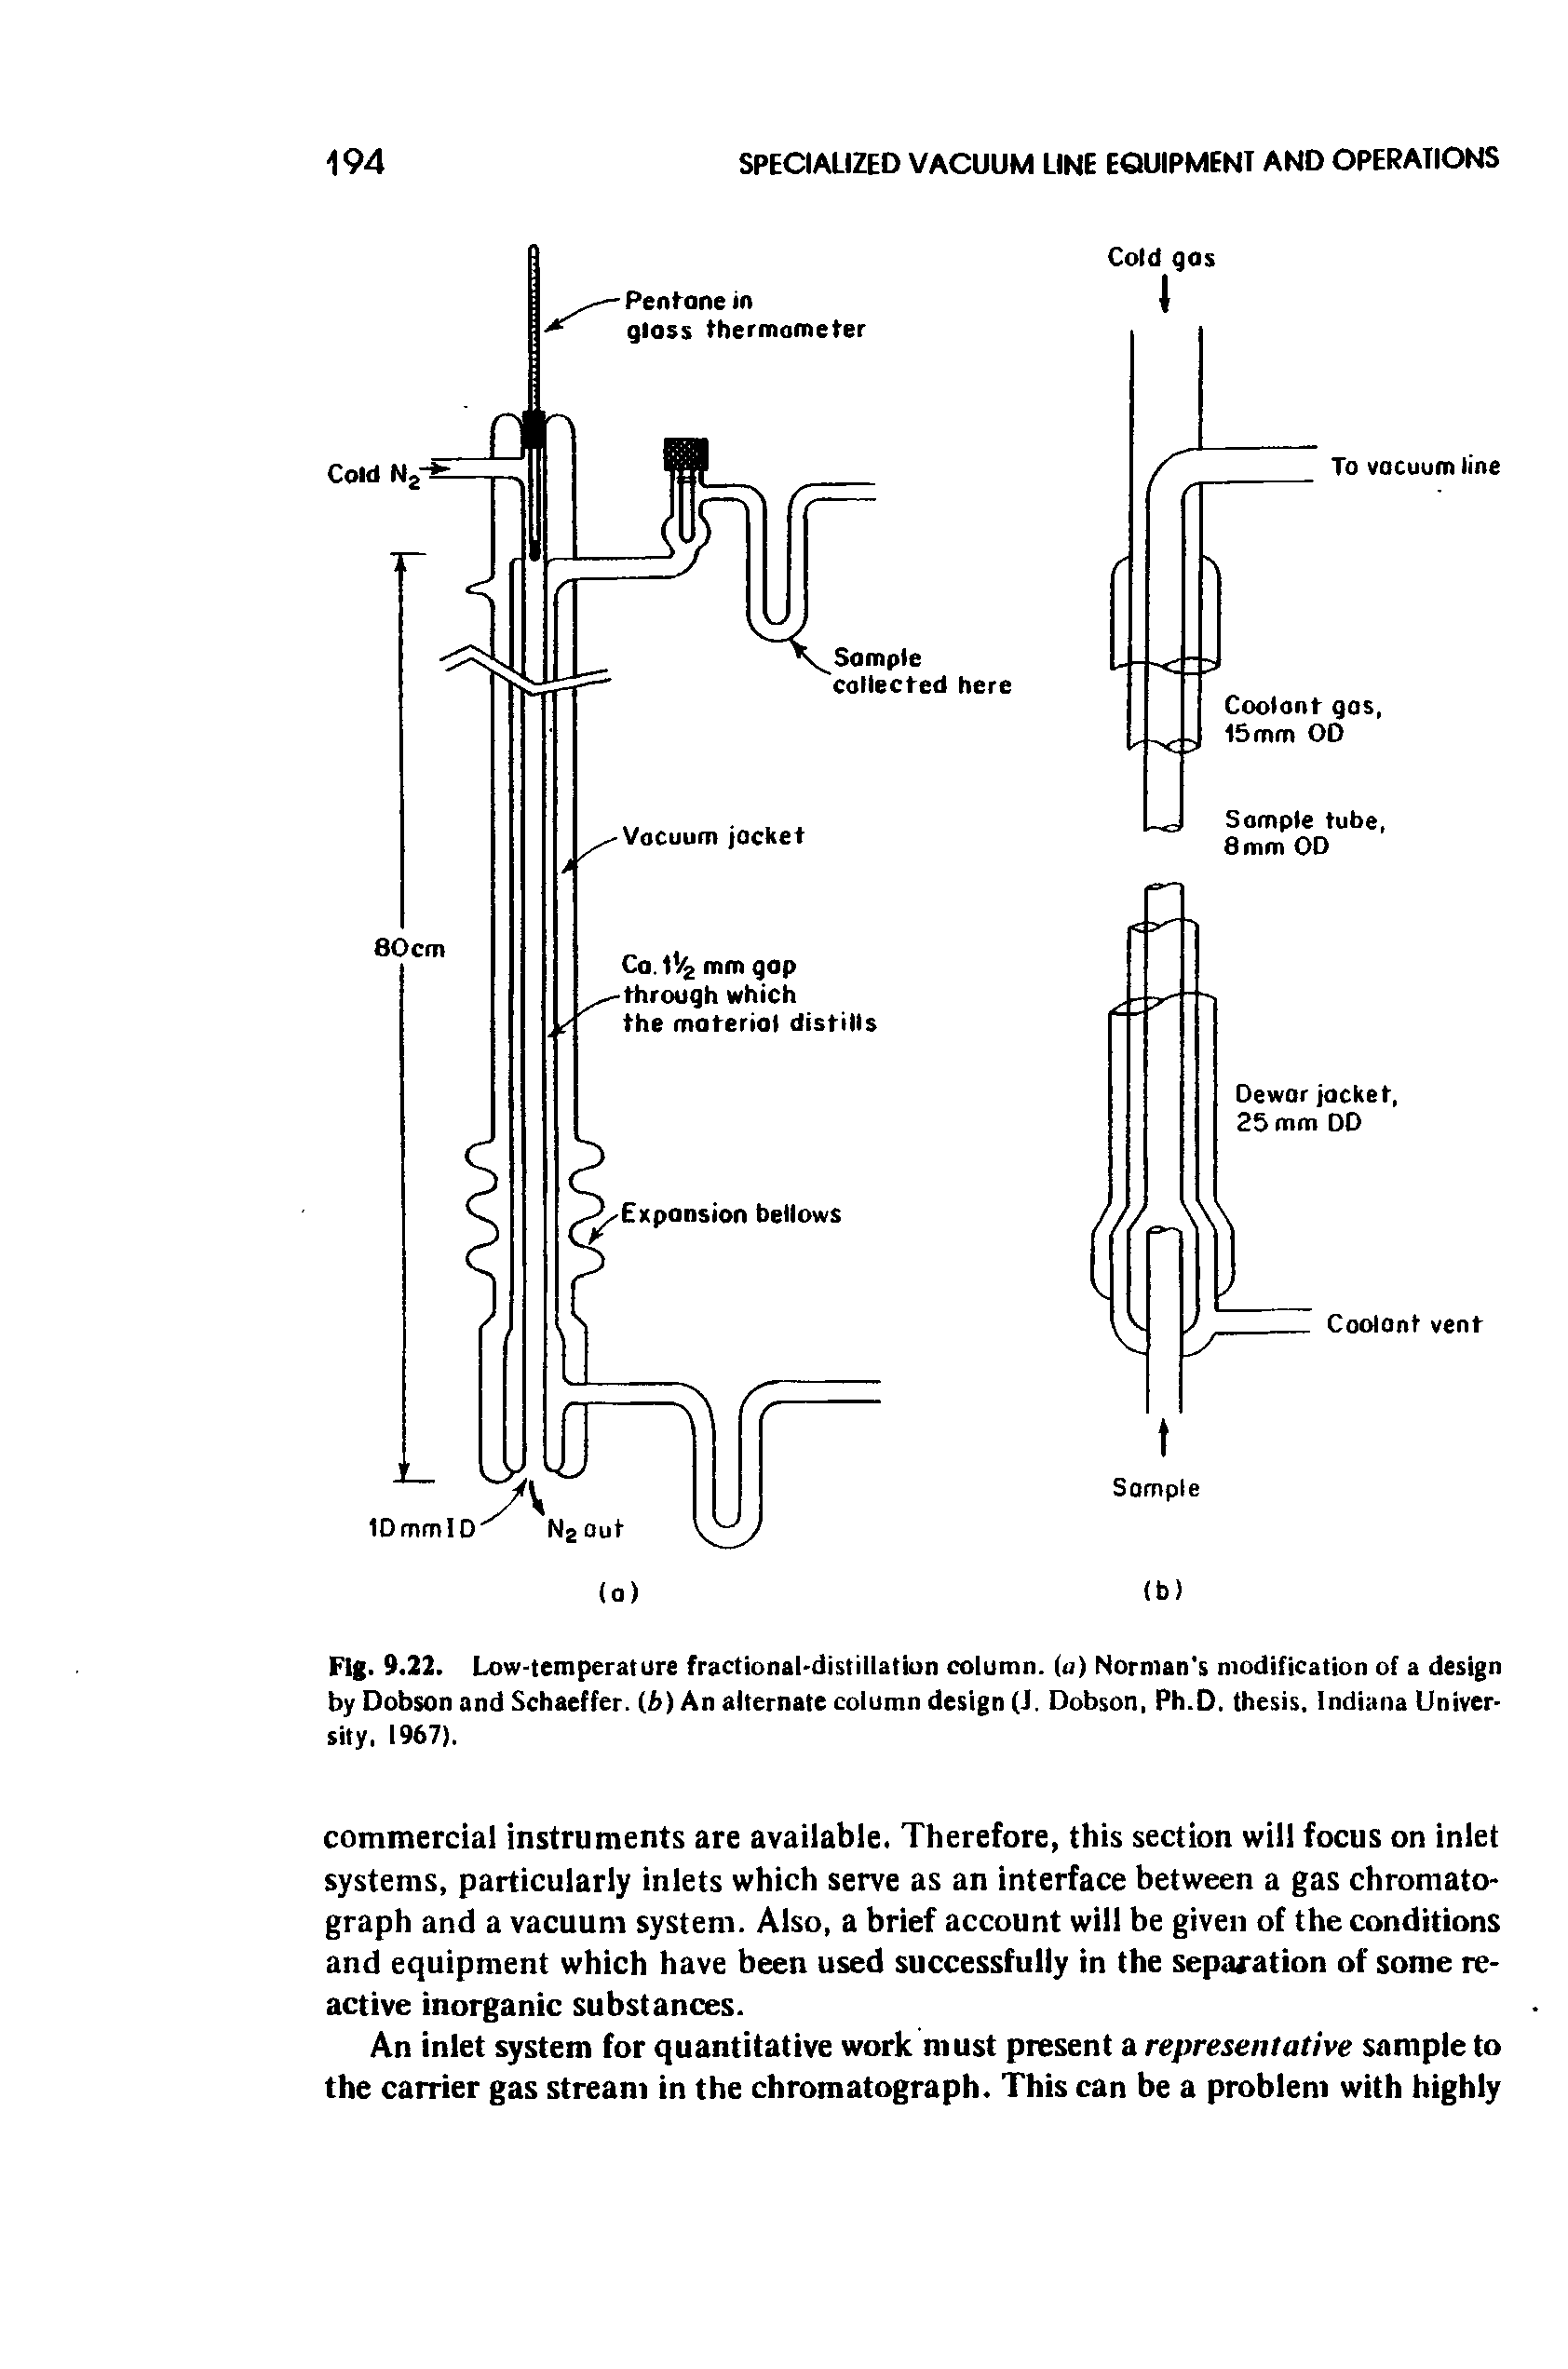 Fig. 9.22. Low-temperature fractional-distillation column, ( ) Norman s modification of a design by Dobson and Schaeffer, (b) An alternate column design (I. Dobson, Ph.D. thesis. Indiana University, 1967).